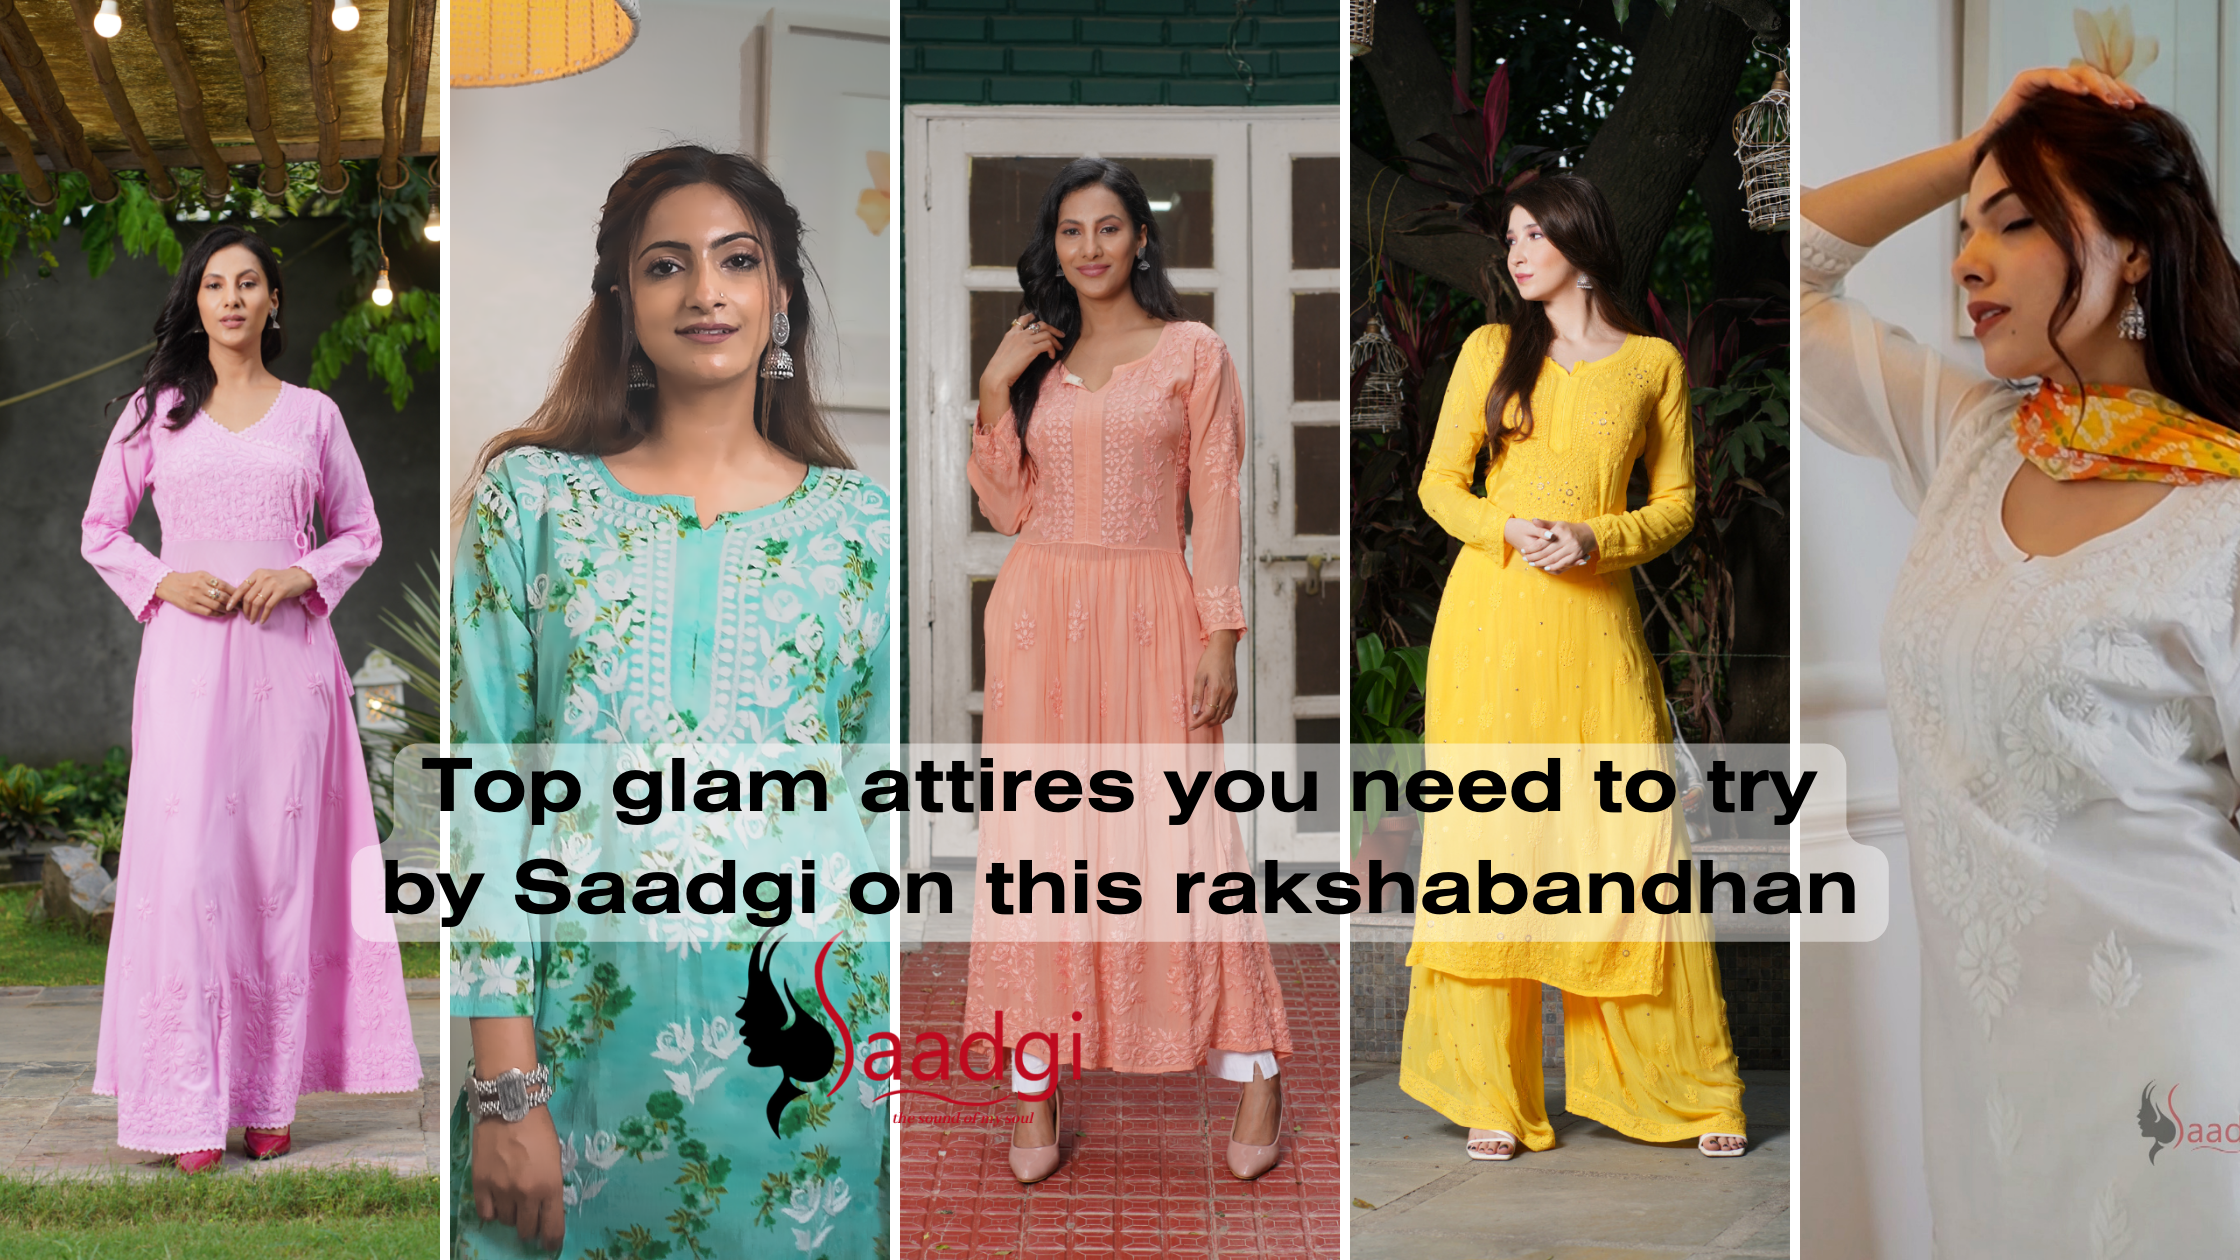 Top glam attires you need to try by Saadgi on this rakshabandhan